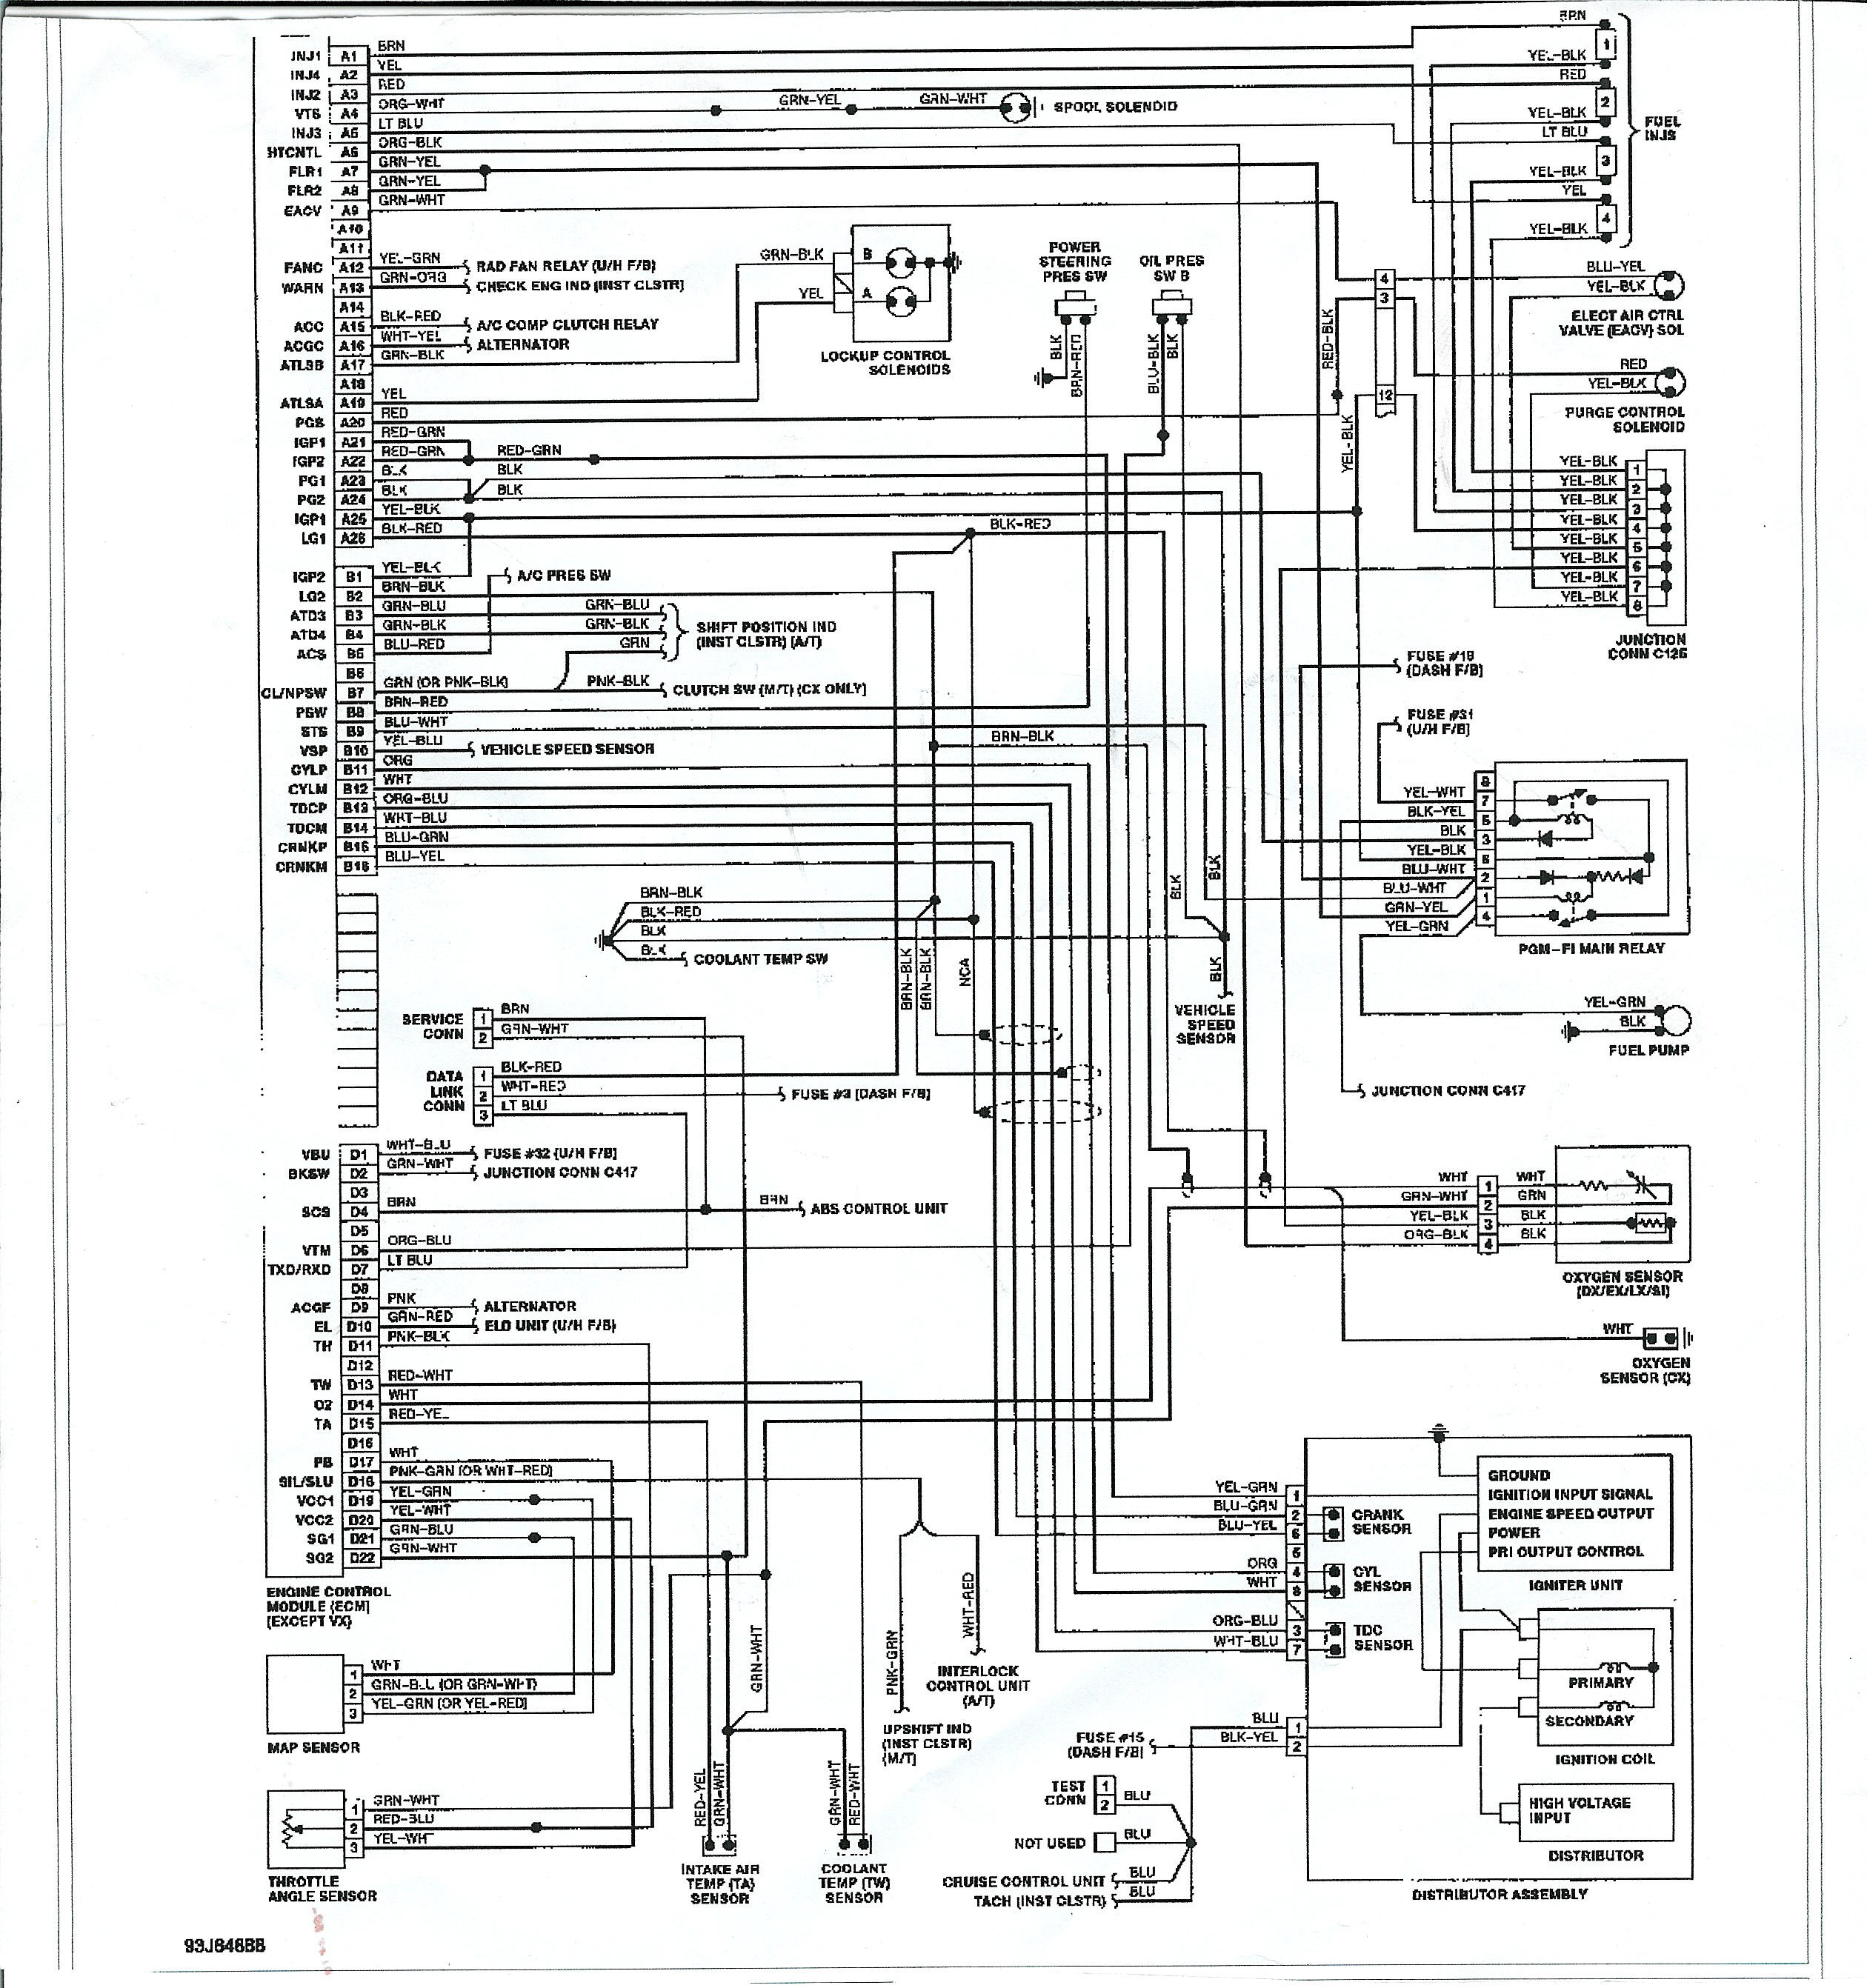 95 Civic Engine Diagram Awesome Wiring Diagram Honda Civic Everything You Need to